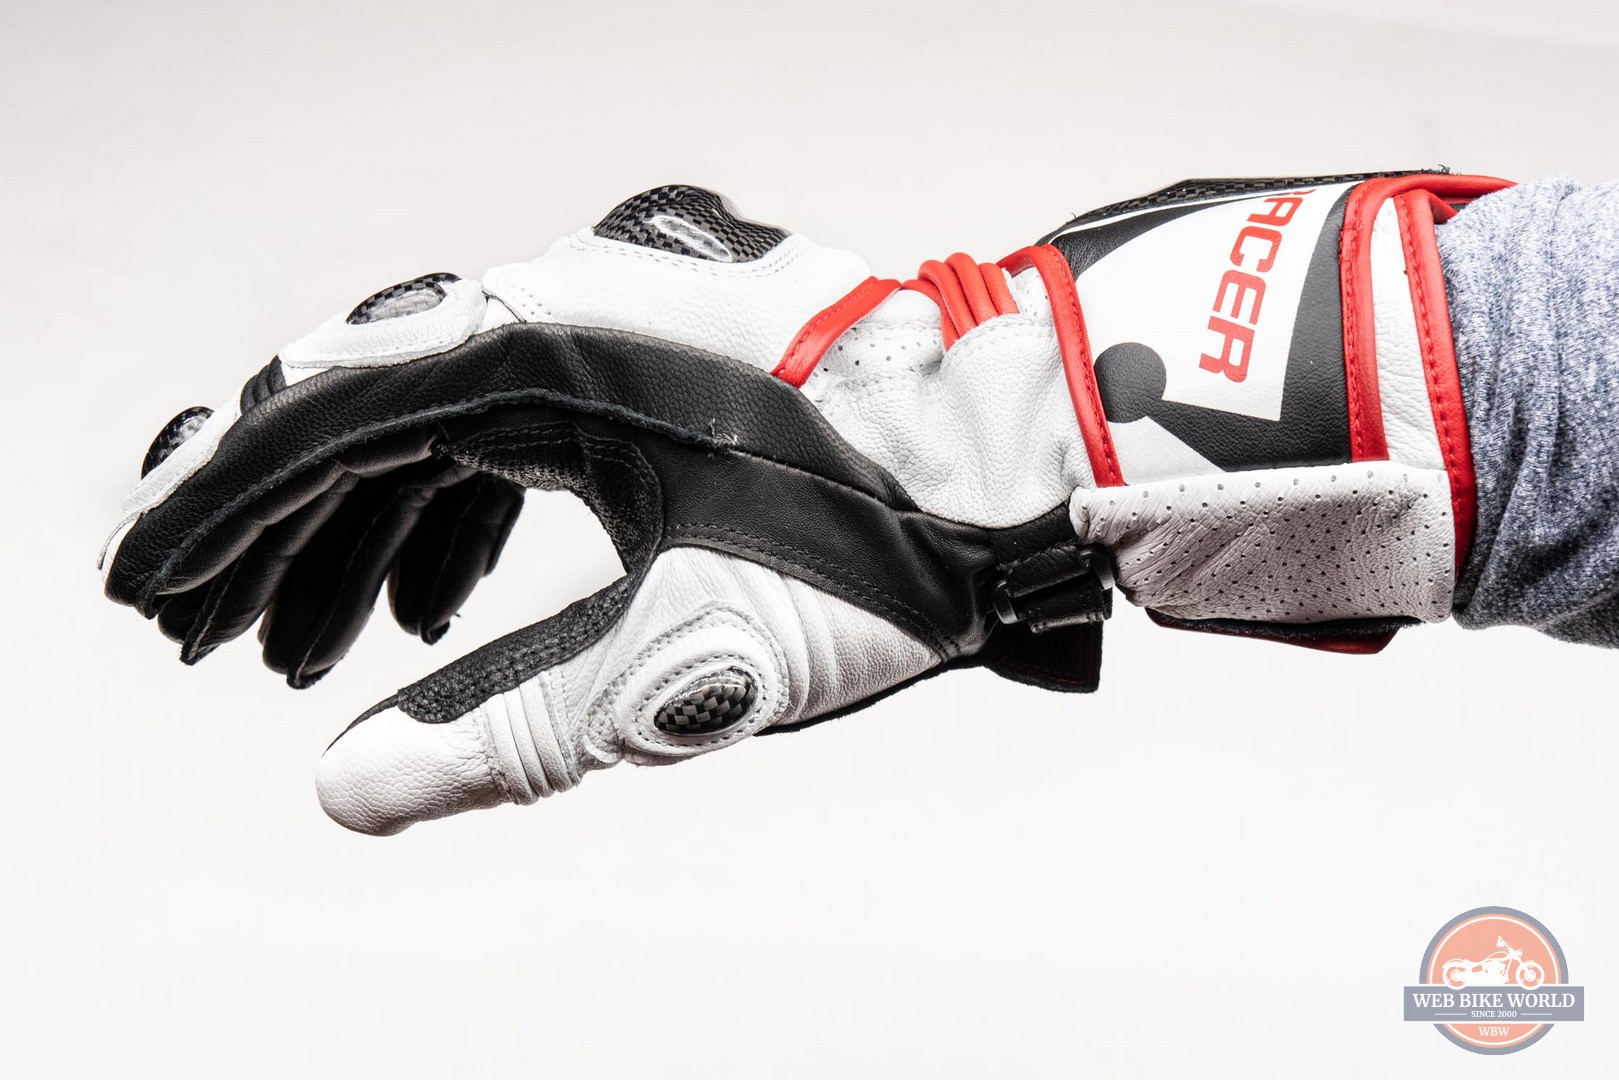 Left side view of the Hi Per glove